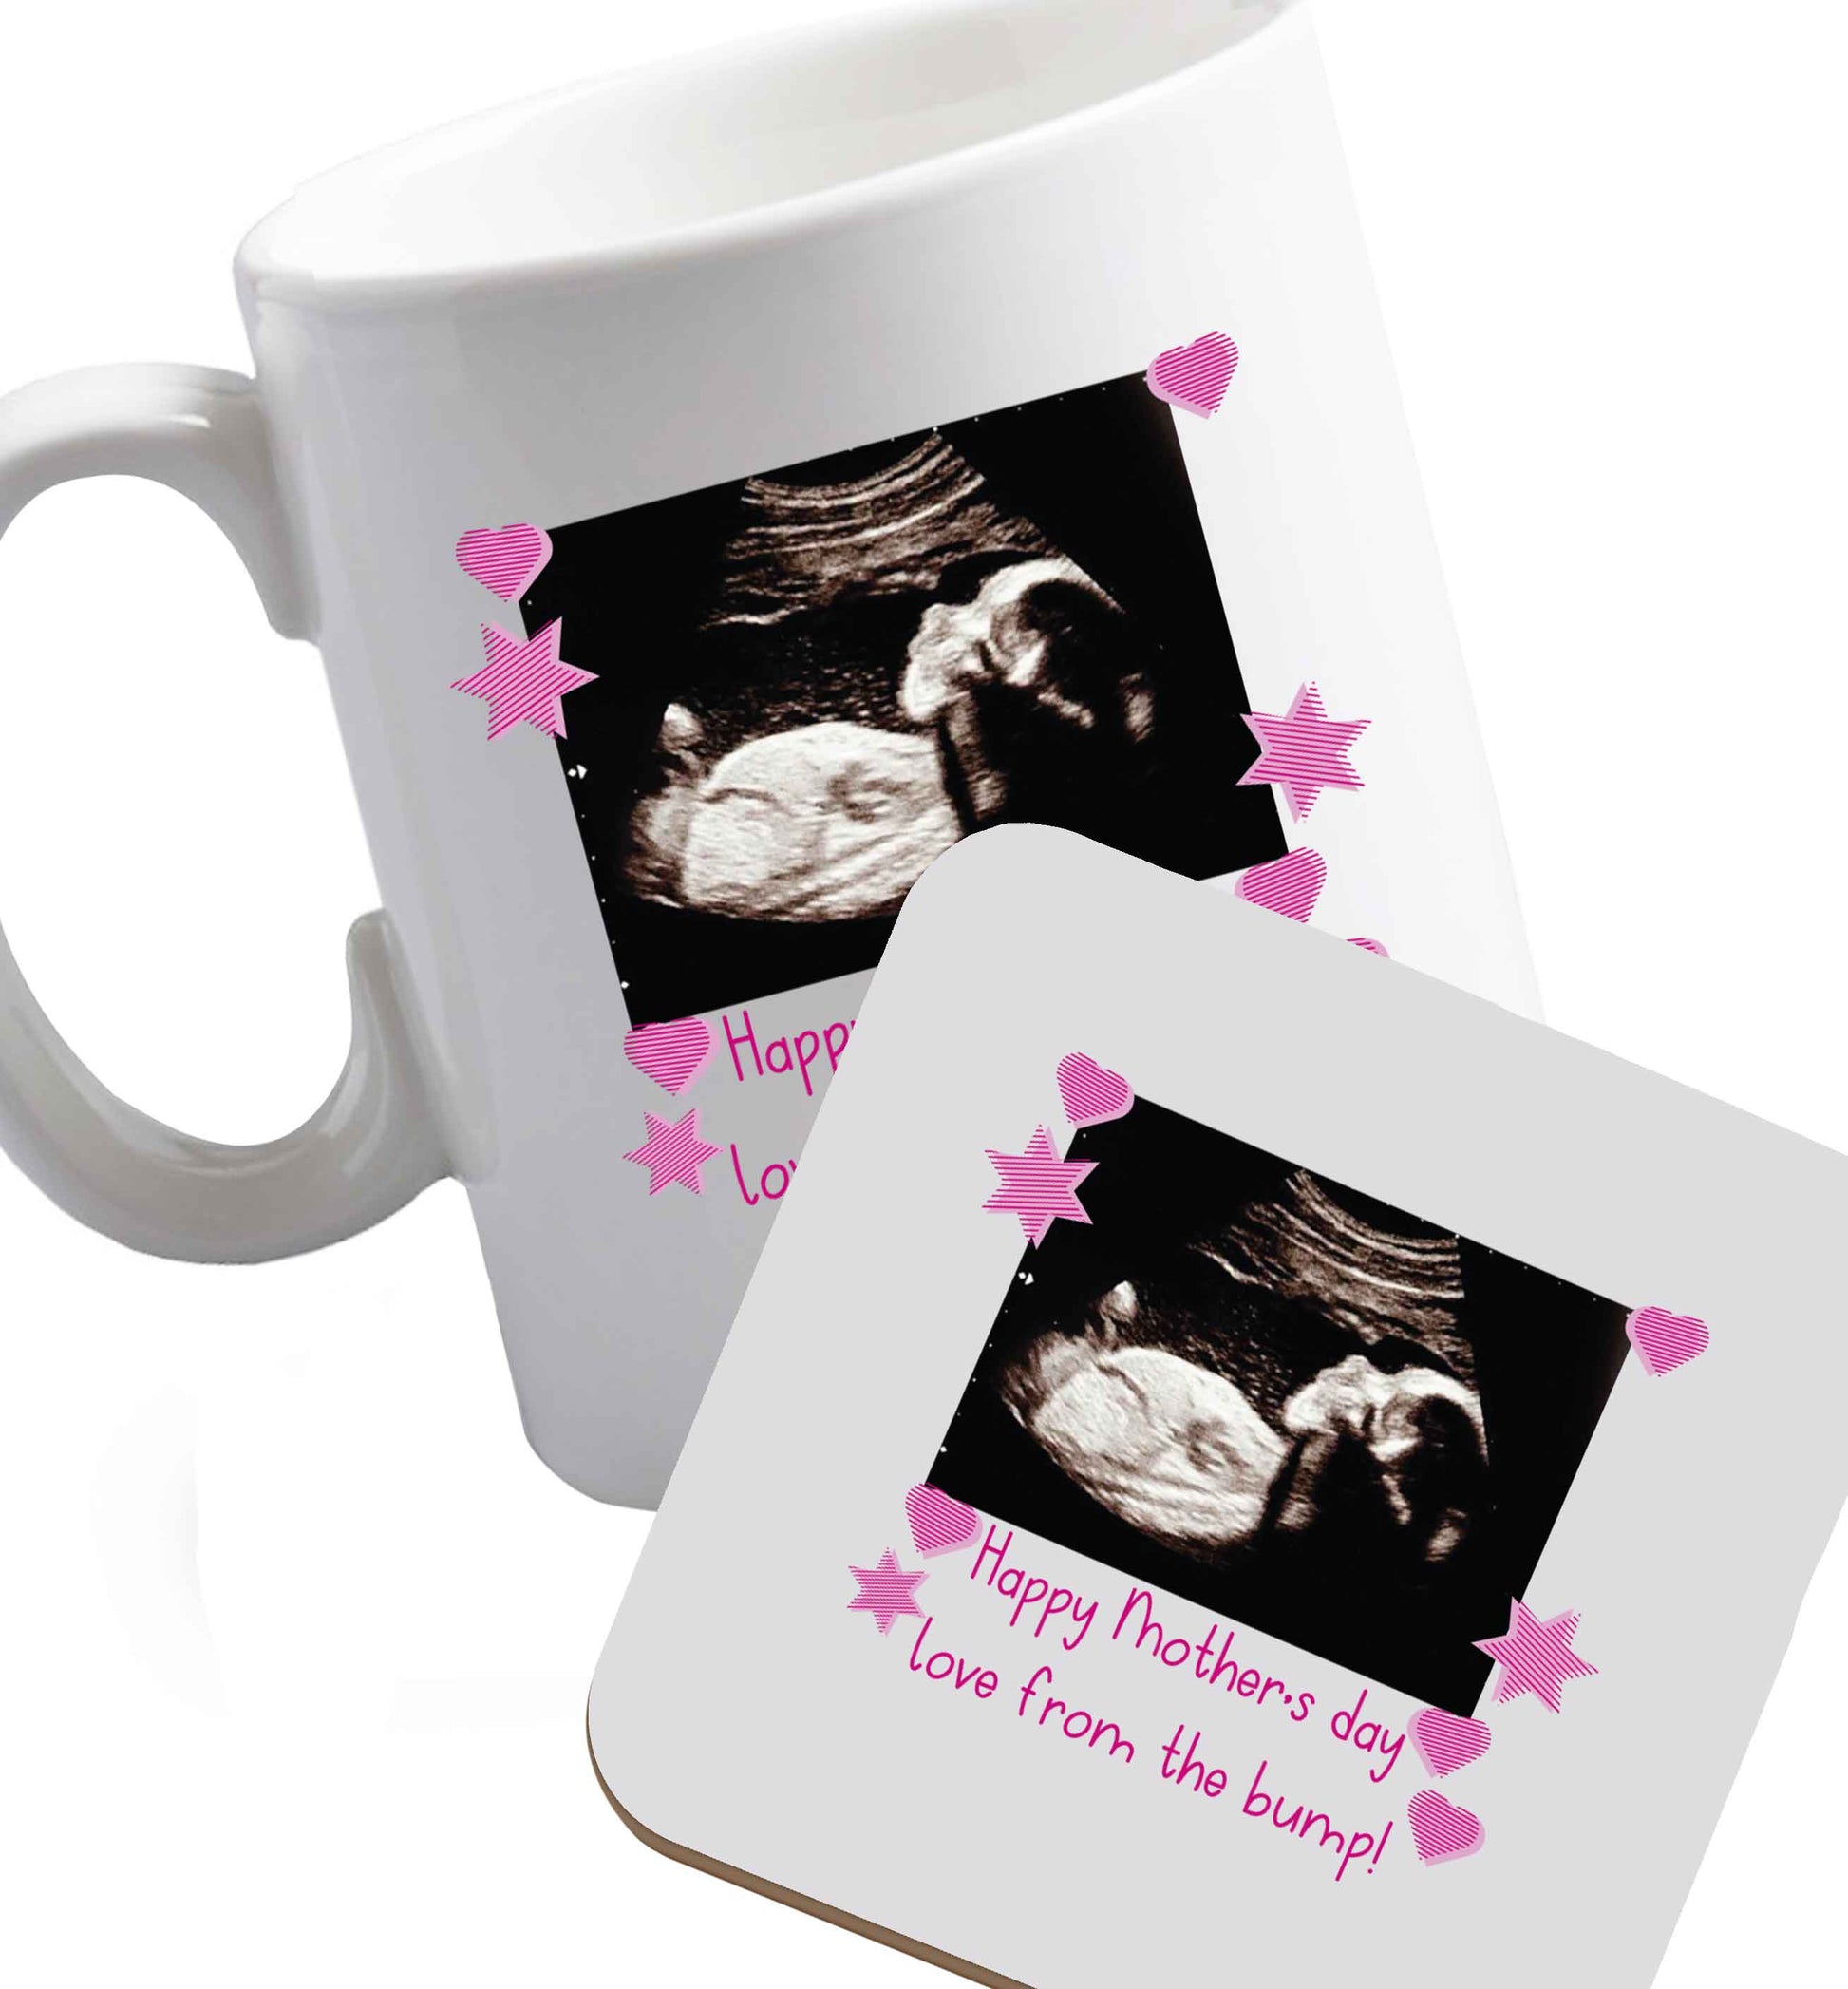 10 oz Happy Mother's day love from the bump - pink  ceramic mug and coaster set right handed